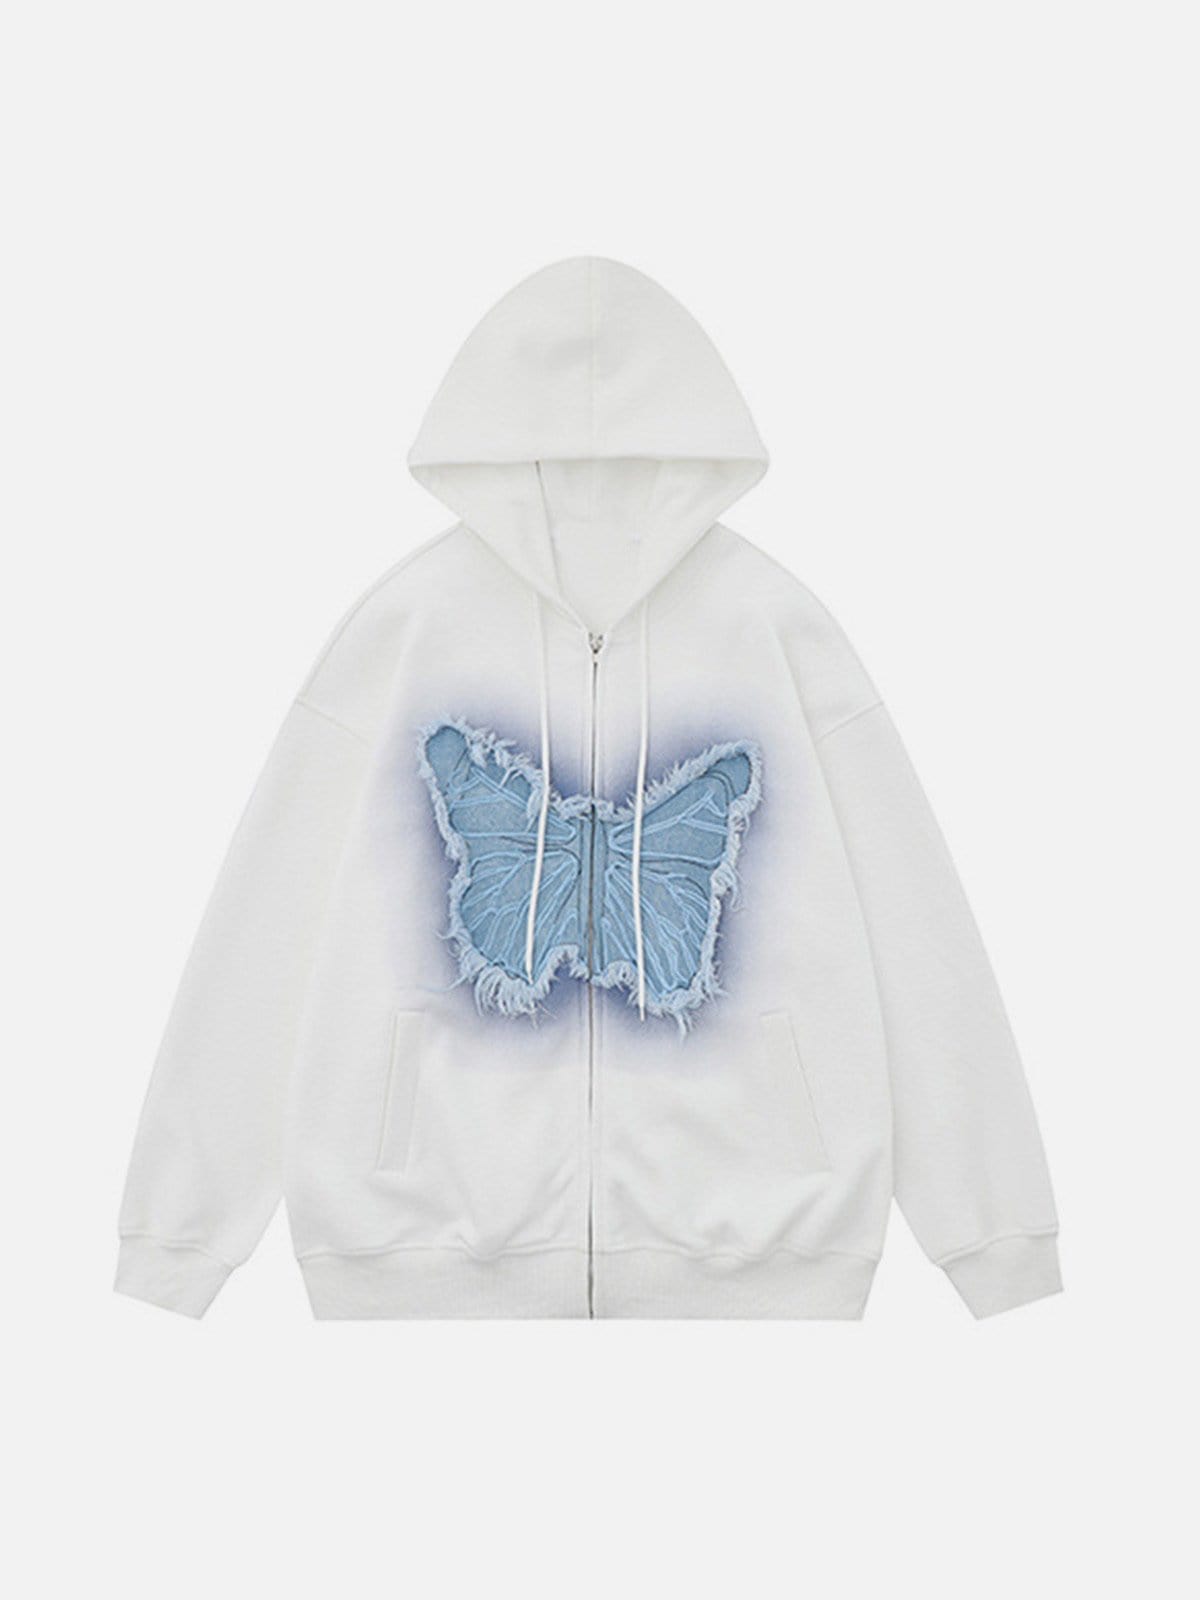 NEV Distressed Butterfly Patch Cardigan Hoodie